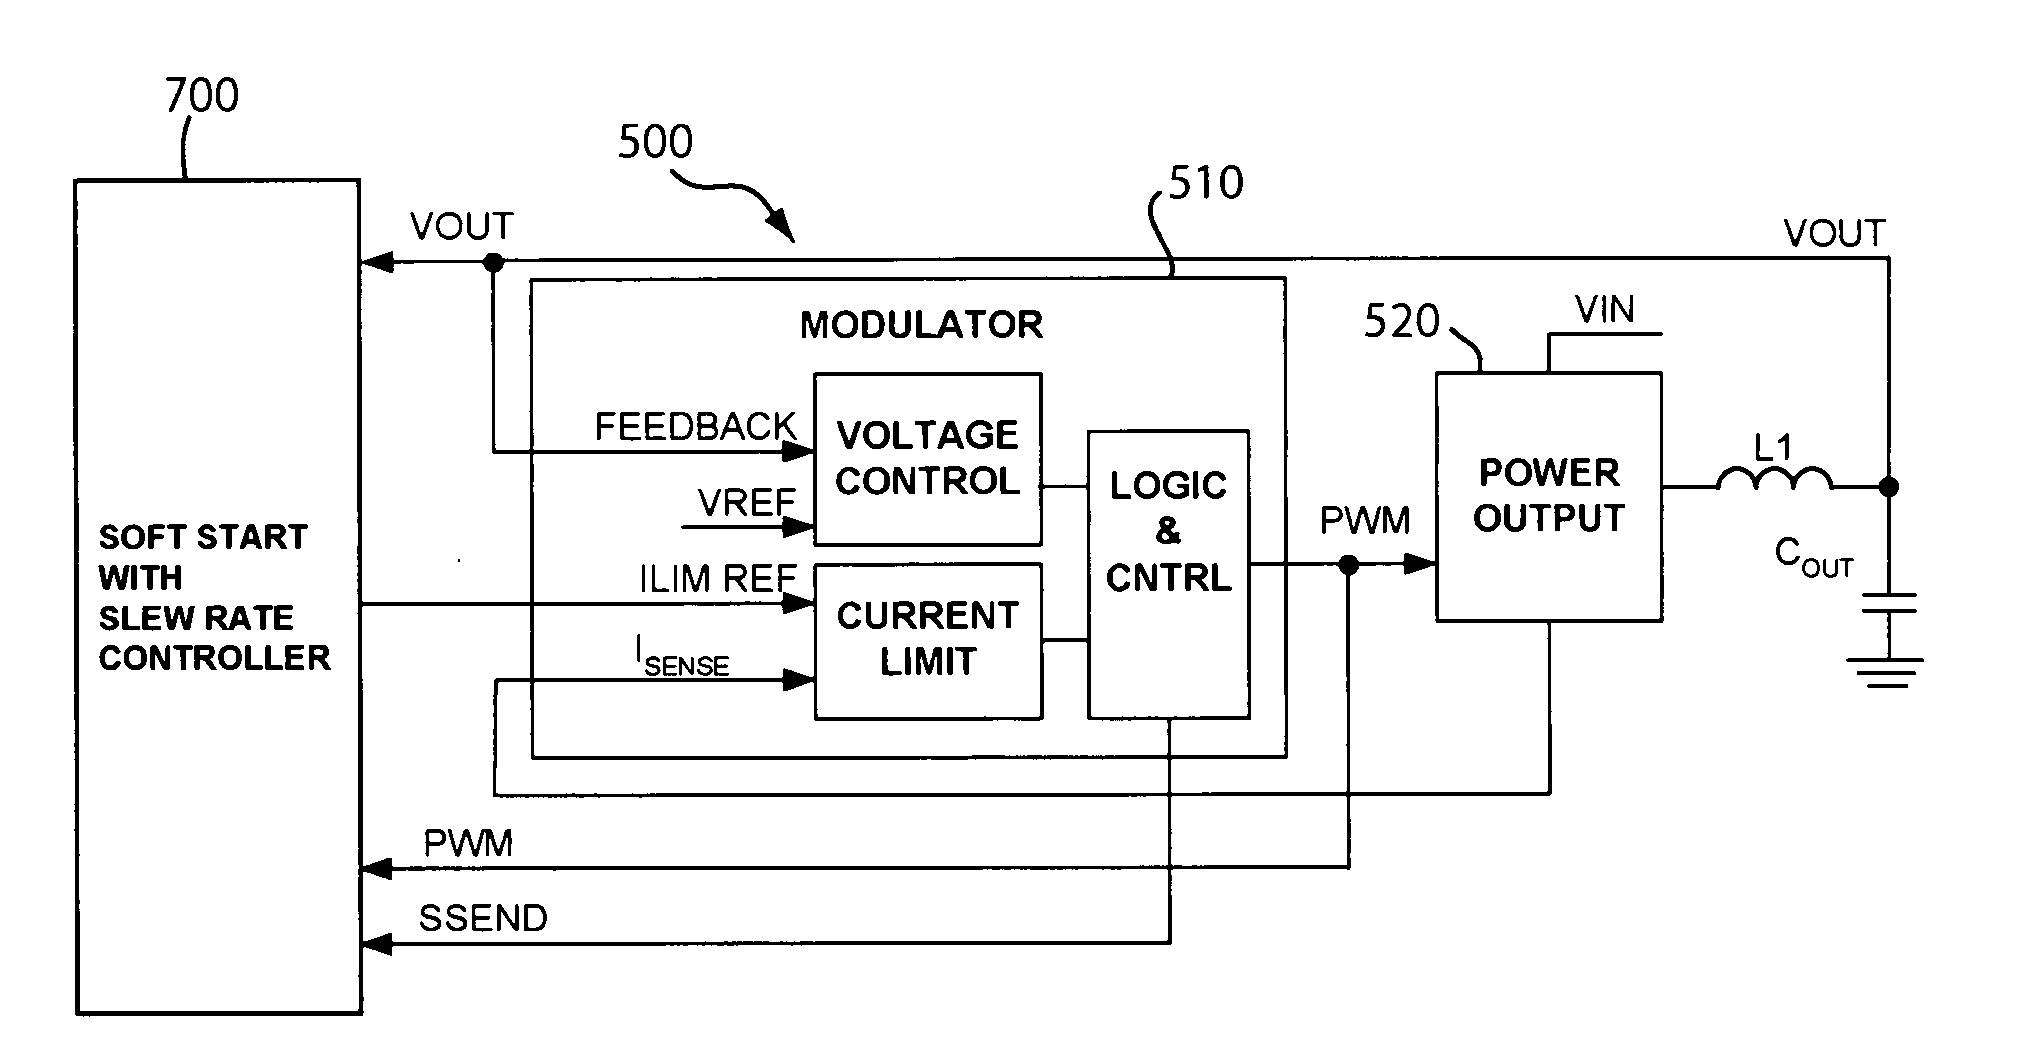 Soft start circuit with slew rate controller for voltage regulators